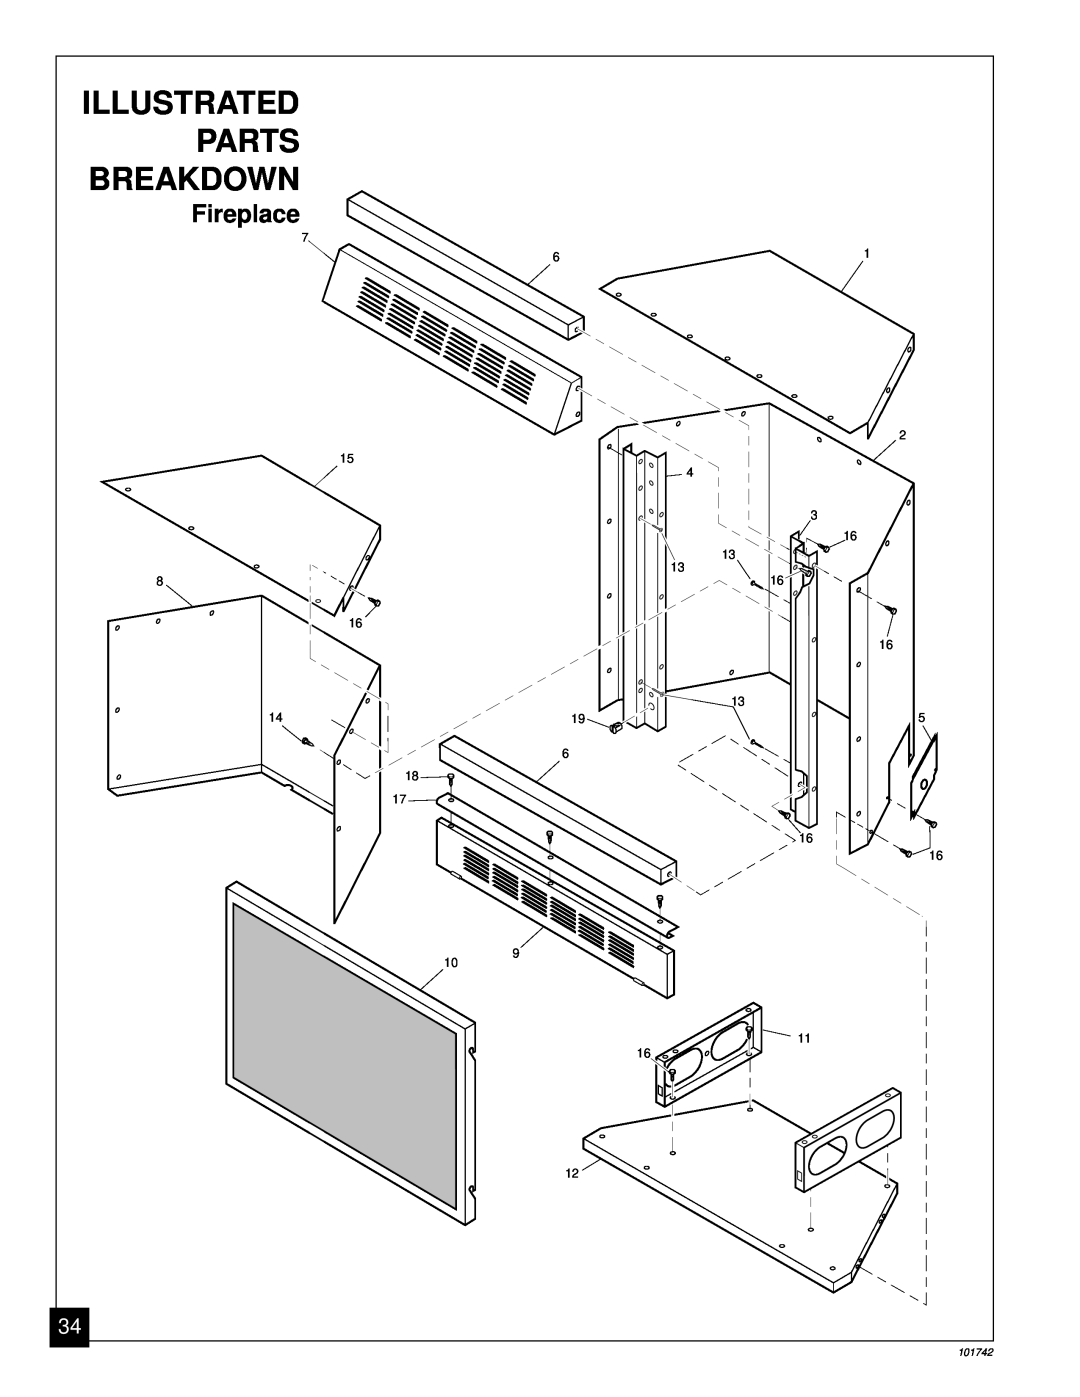 Desa UNVENTED (VENT-FREE) NATURAL GAS FIREPLACE installation manual Fireplace, Illustrated, Parts, Breakdown, 101742 